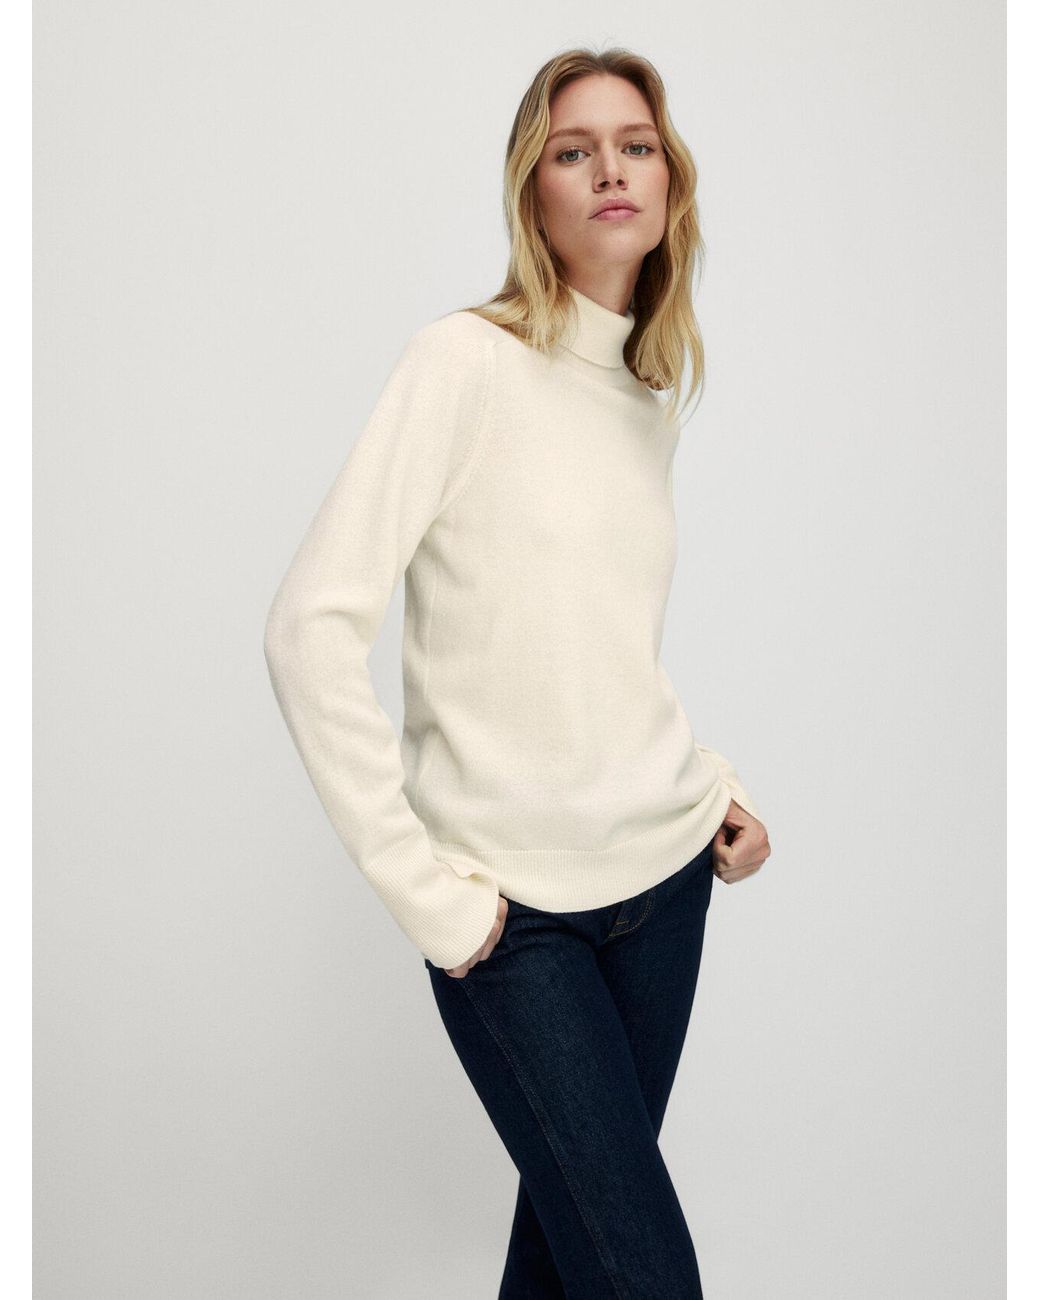 MASSIMO DUTTI Wool And Cashmere High Neck Sweater in White | Lyst